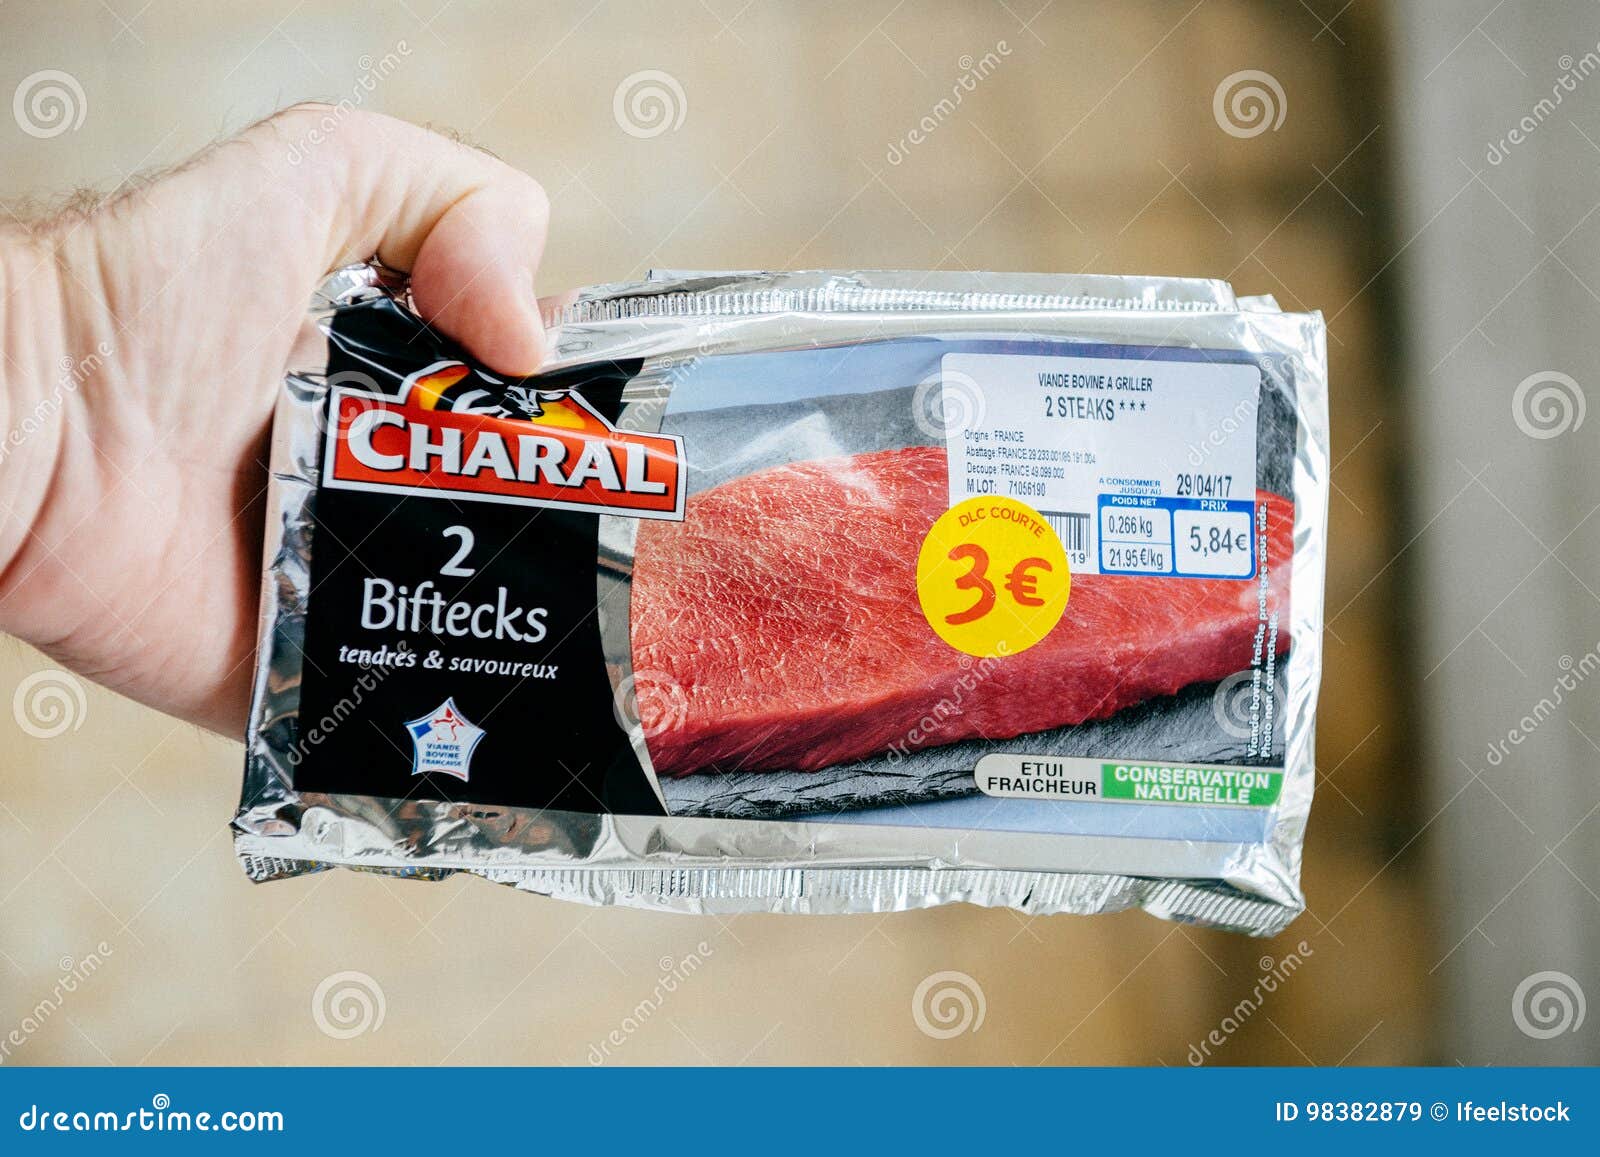 Man Holding Charal Biftecks - Delicious French Meat Editorial